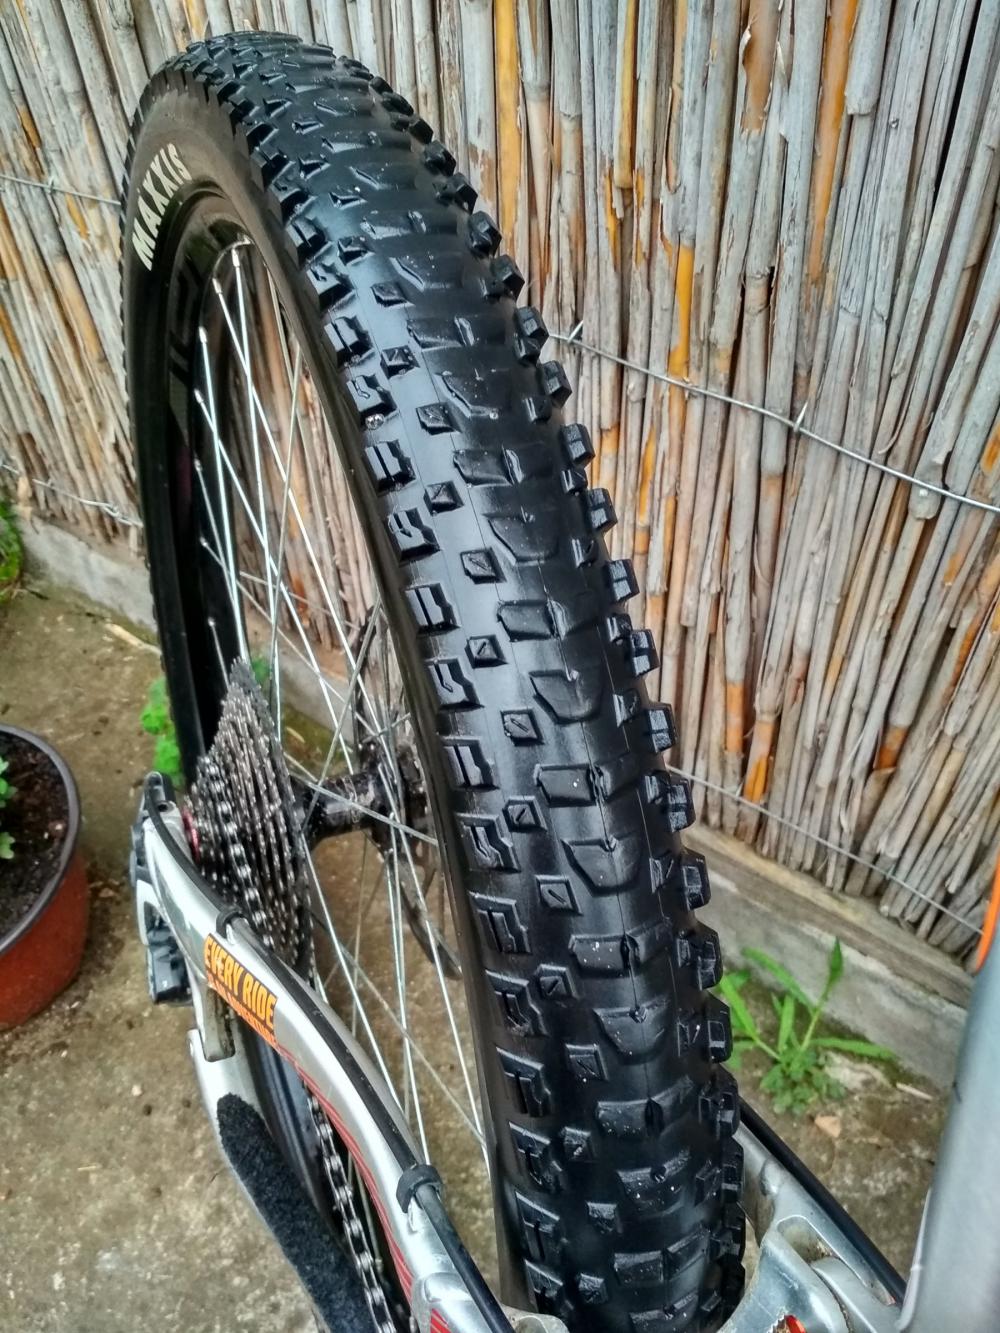 maxxis dhf 27.5 2.5